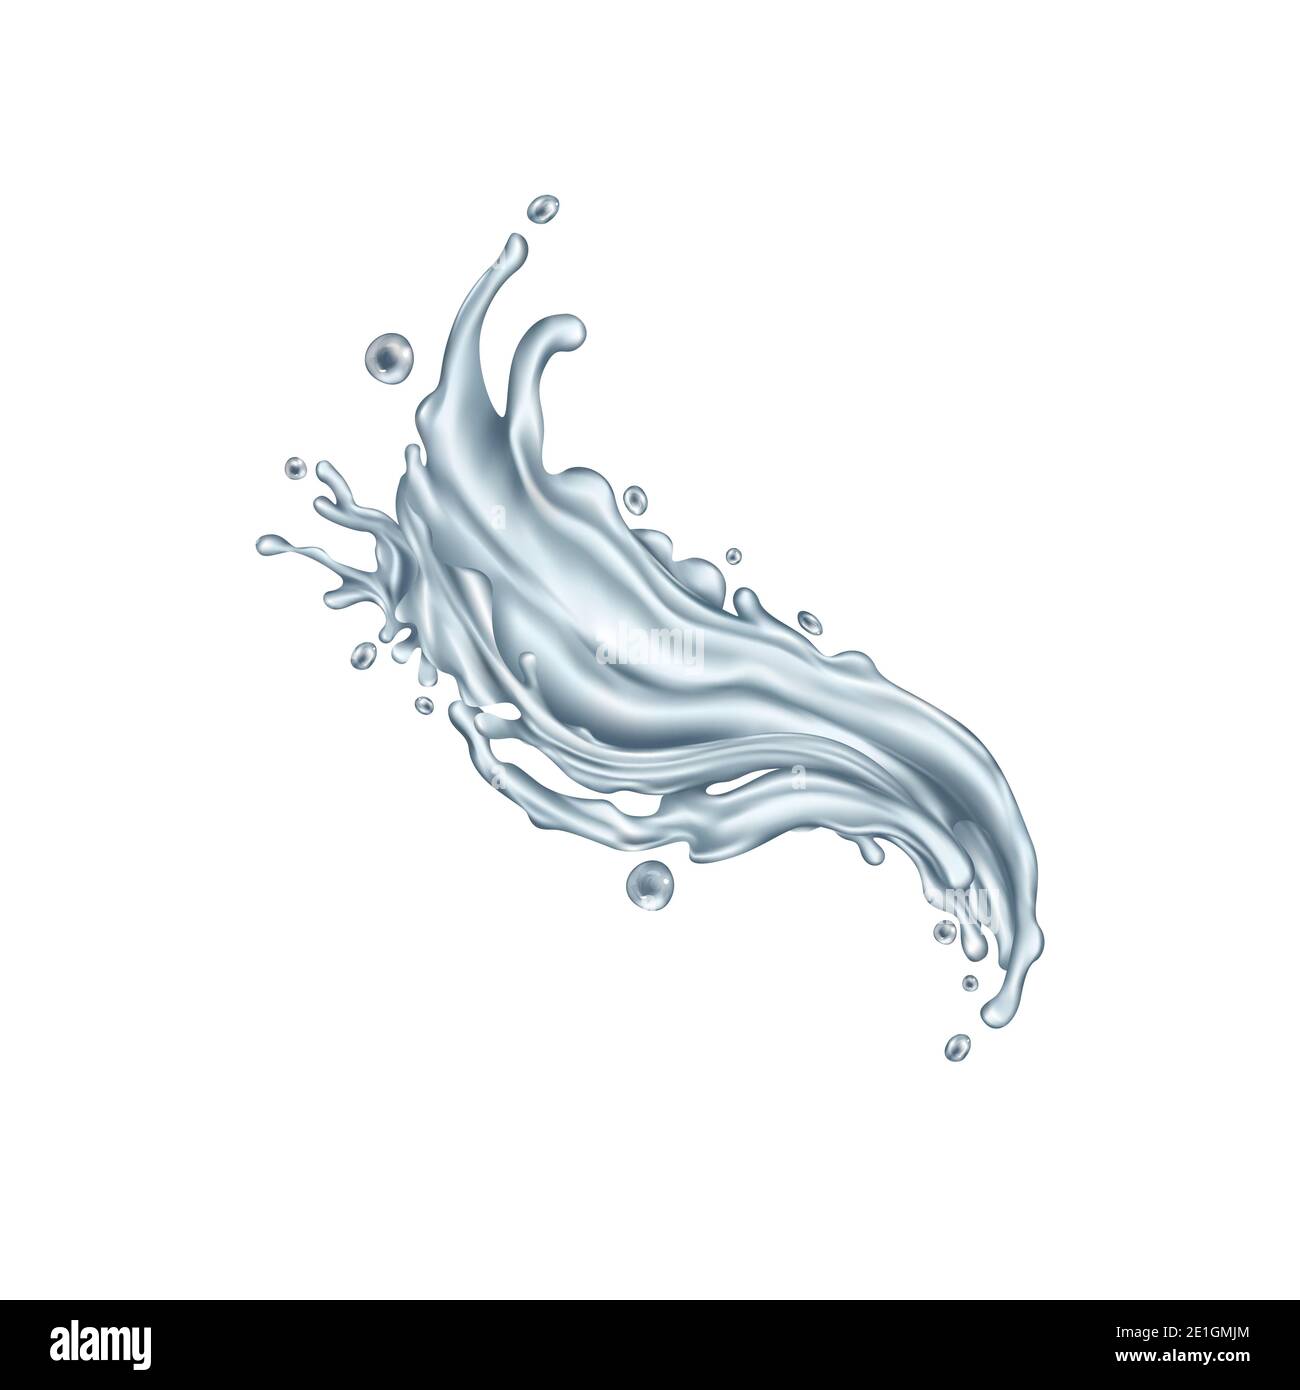 Clear water splash on a white background Stock Photo